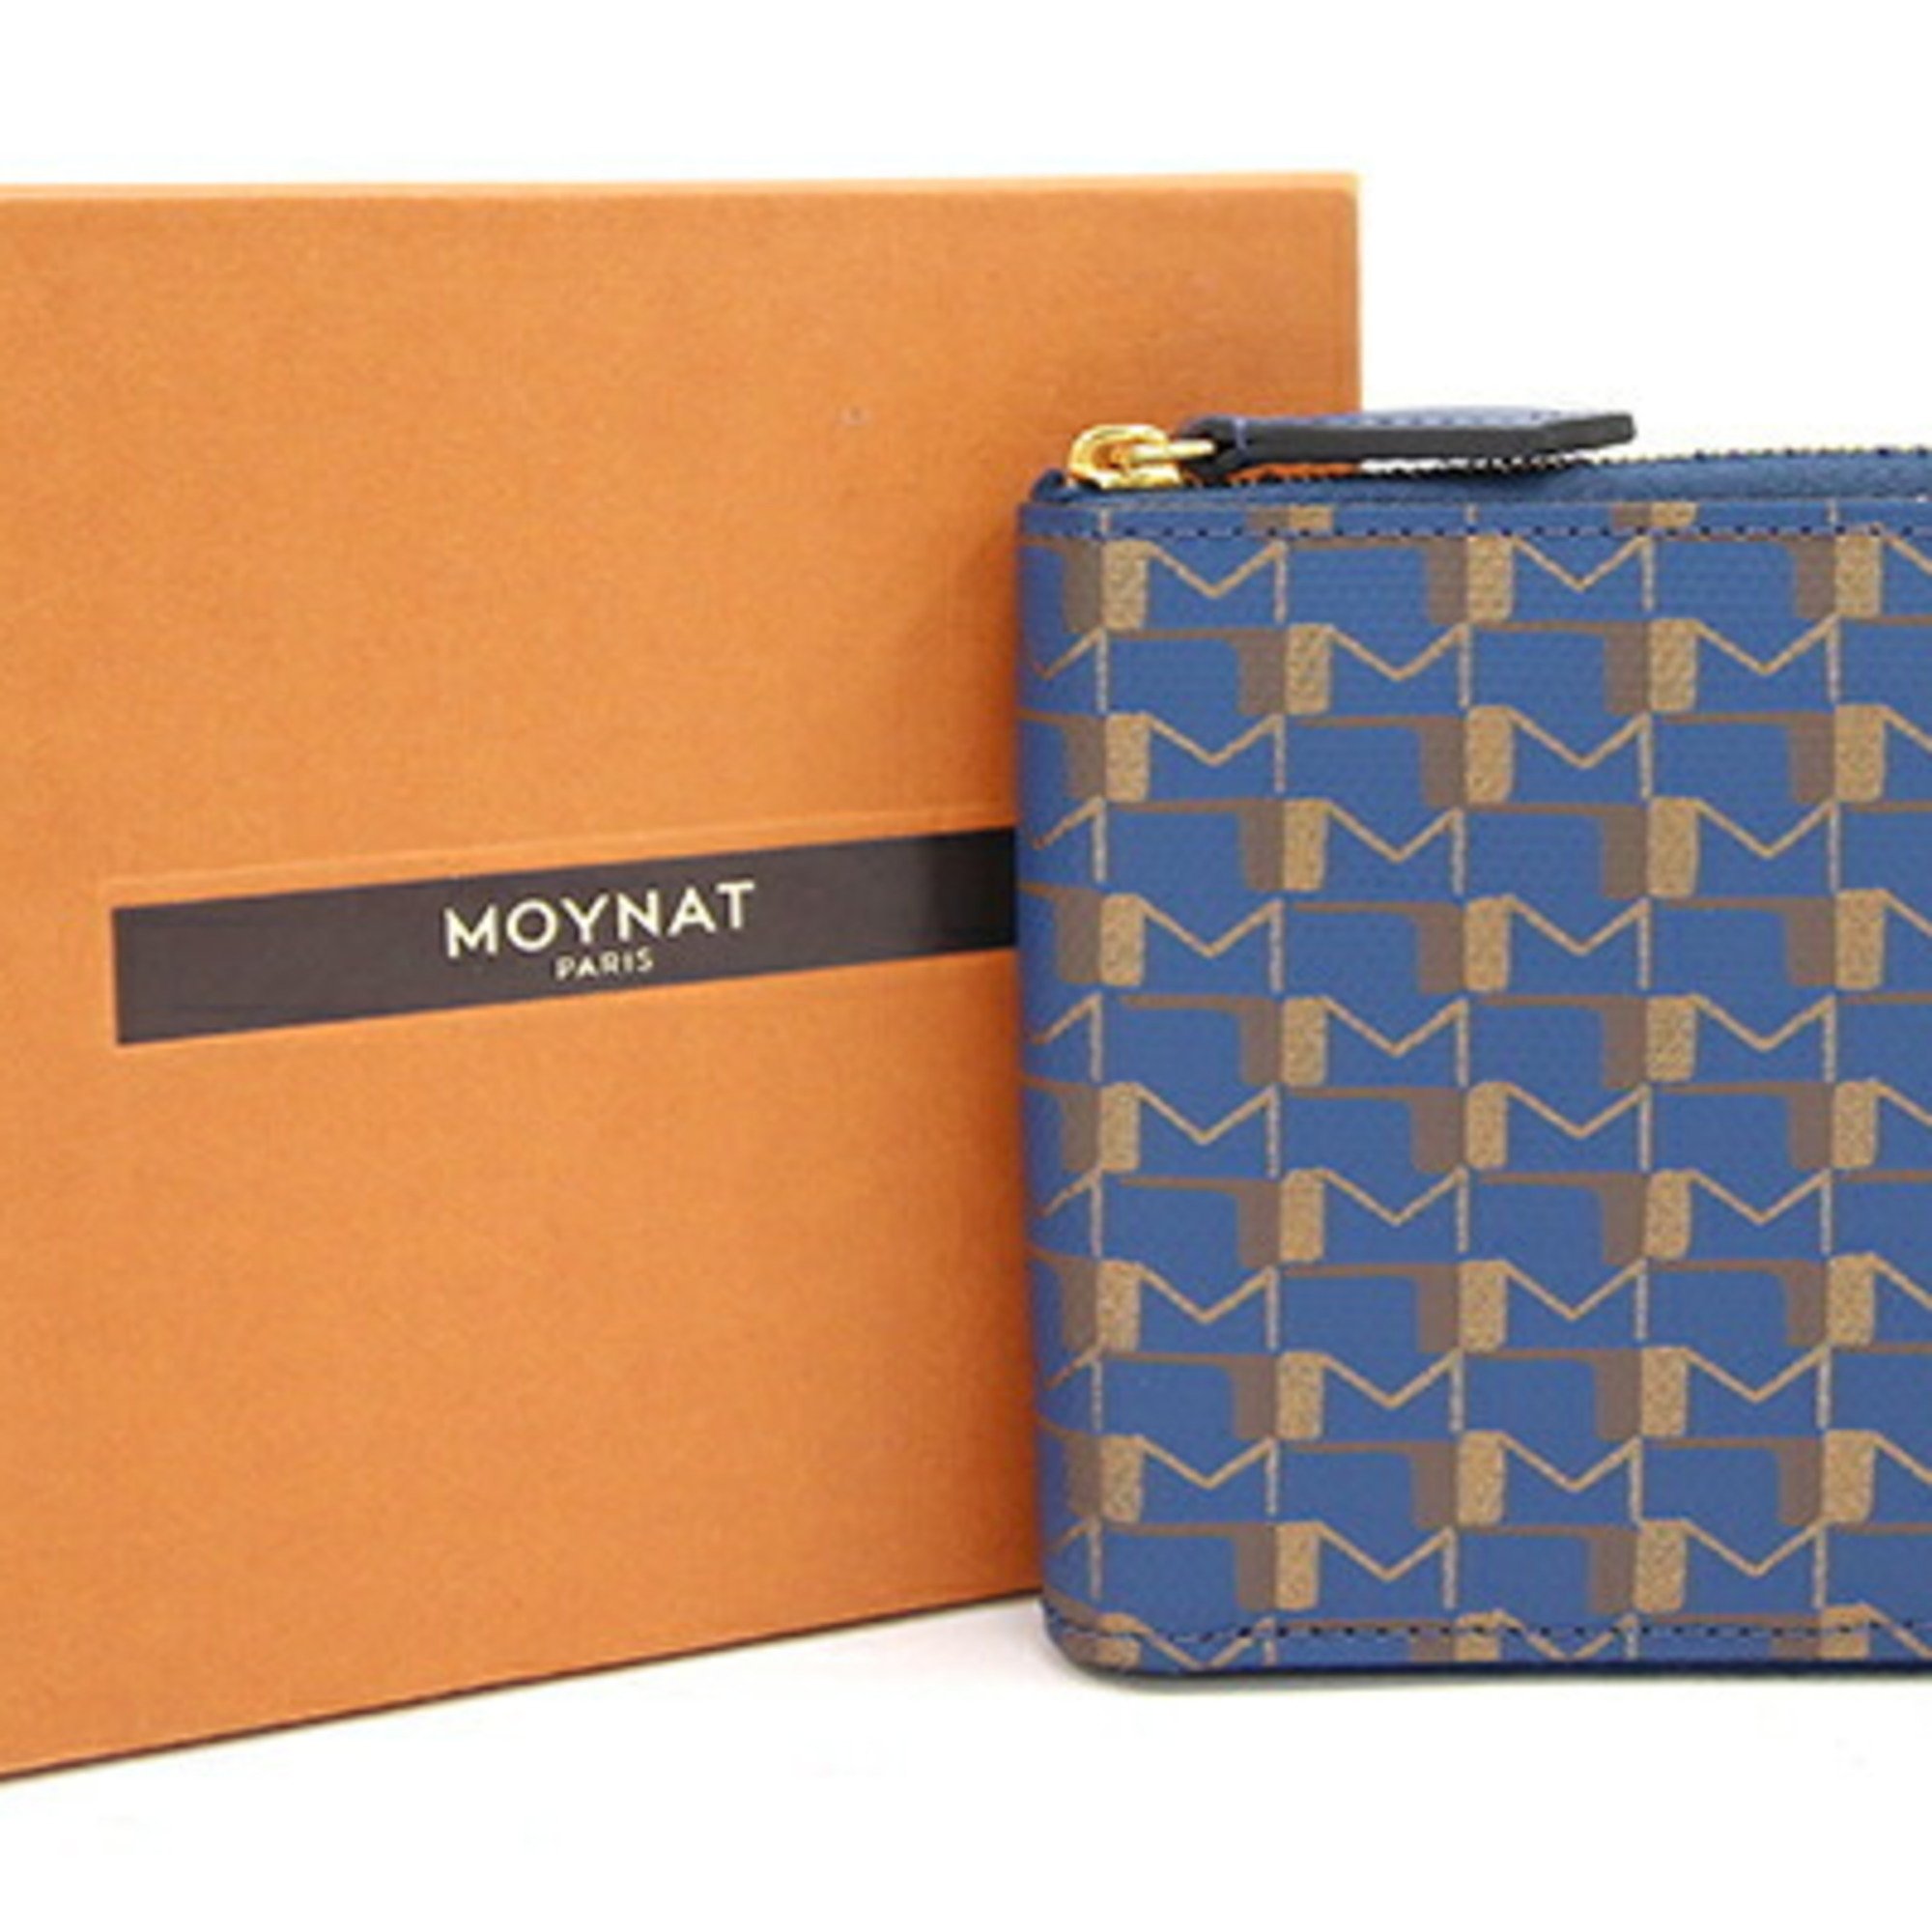 Moynat Round Wallet Navy PVC Leather Small Ladies SLG OH! Canvas TOILE 1920 MOYNAT